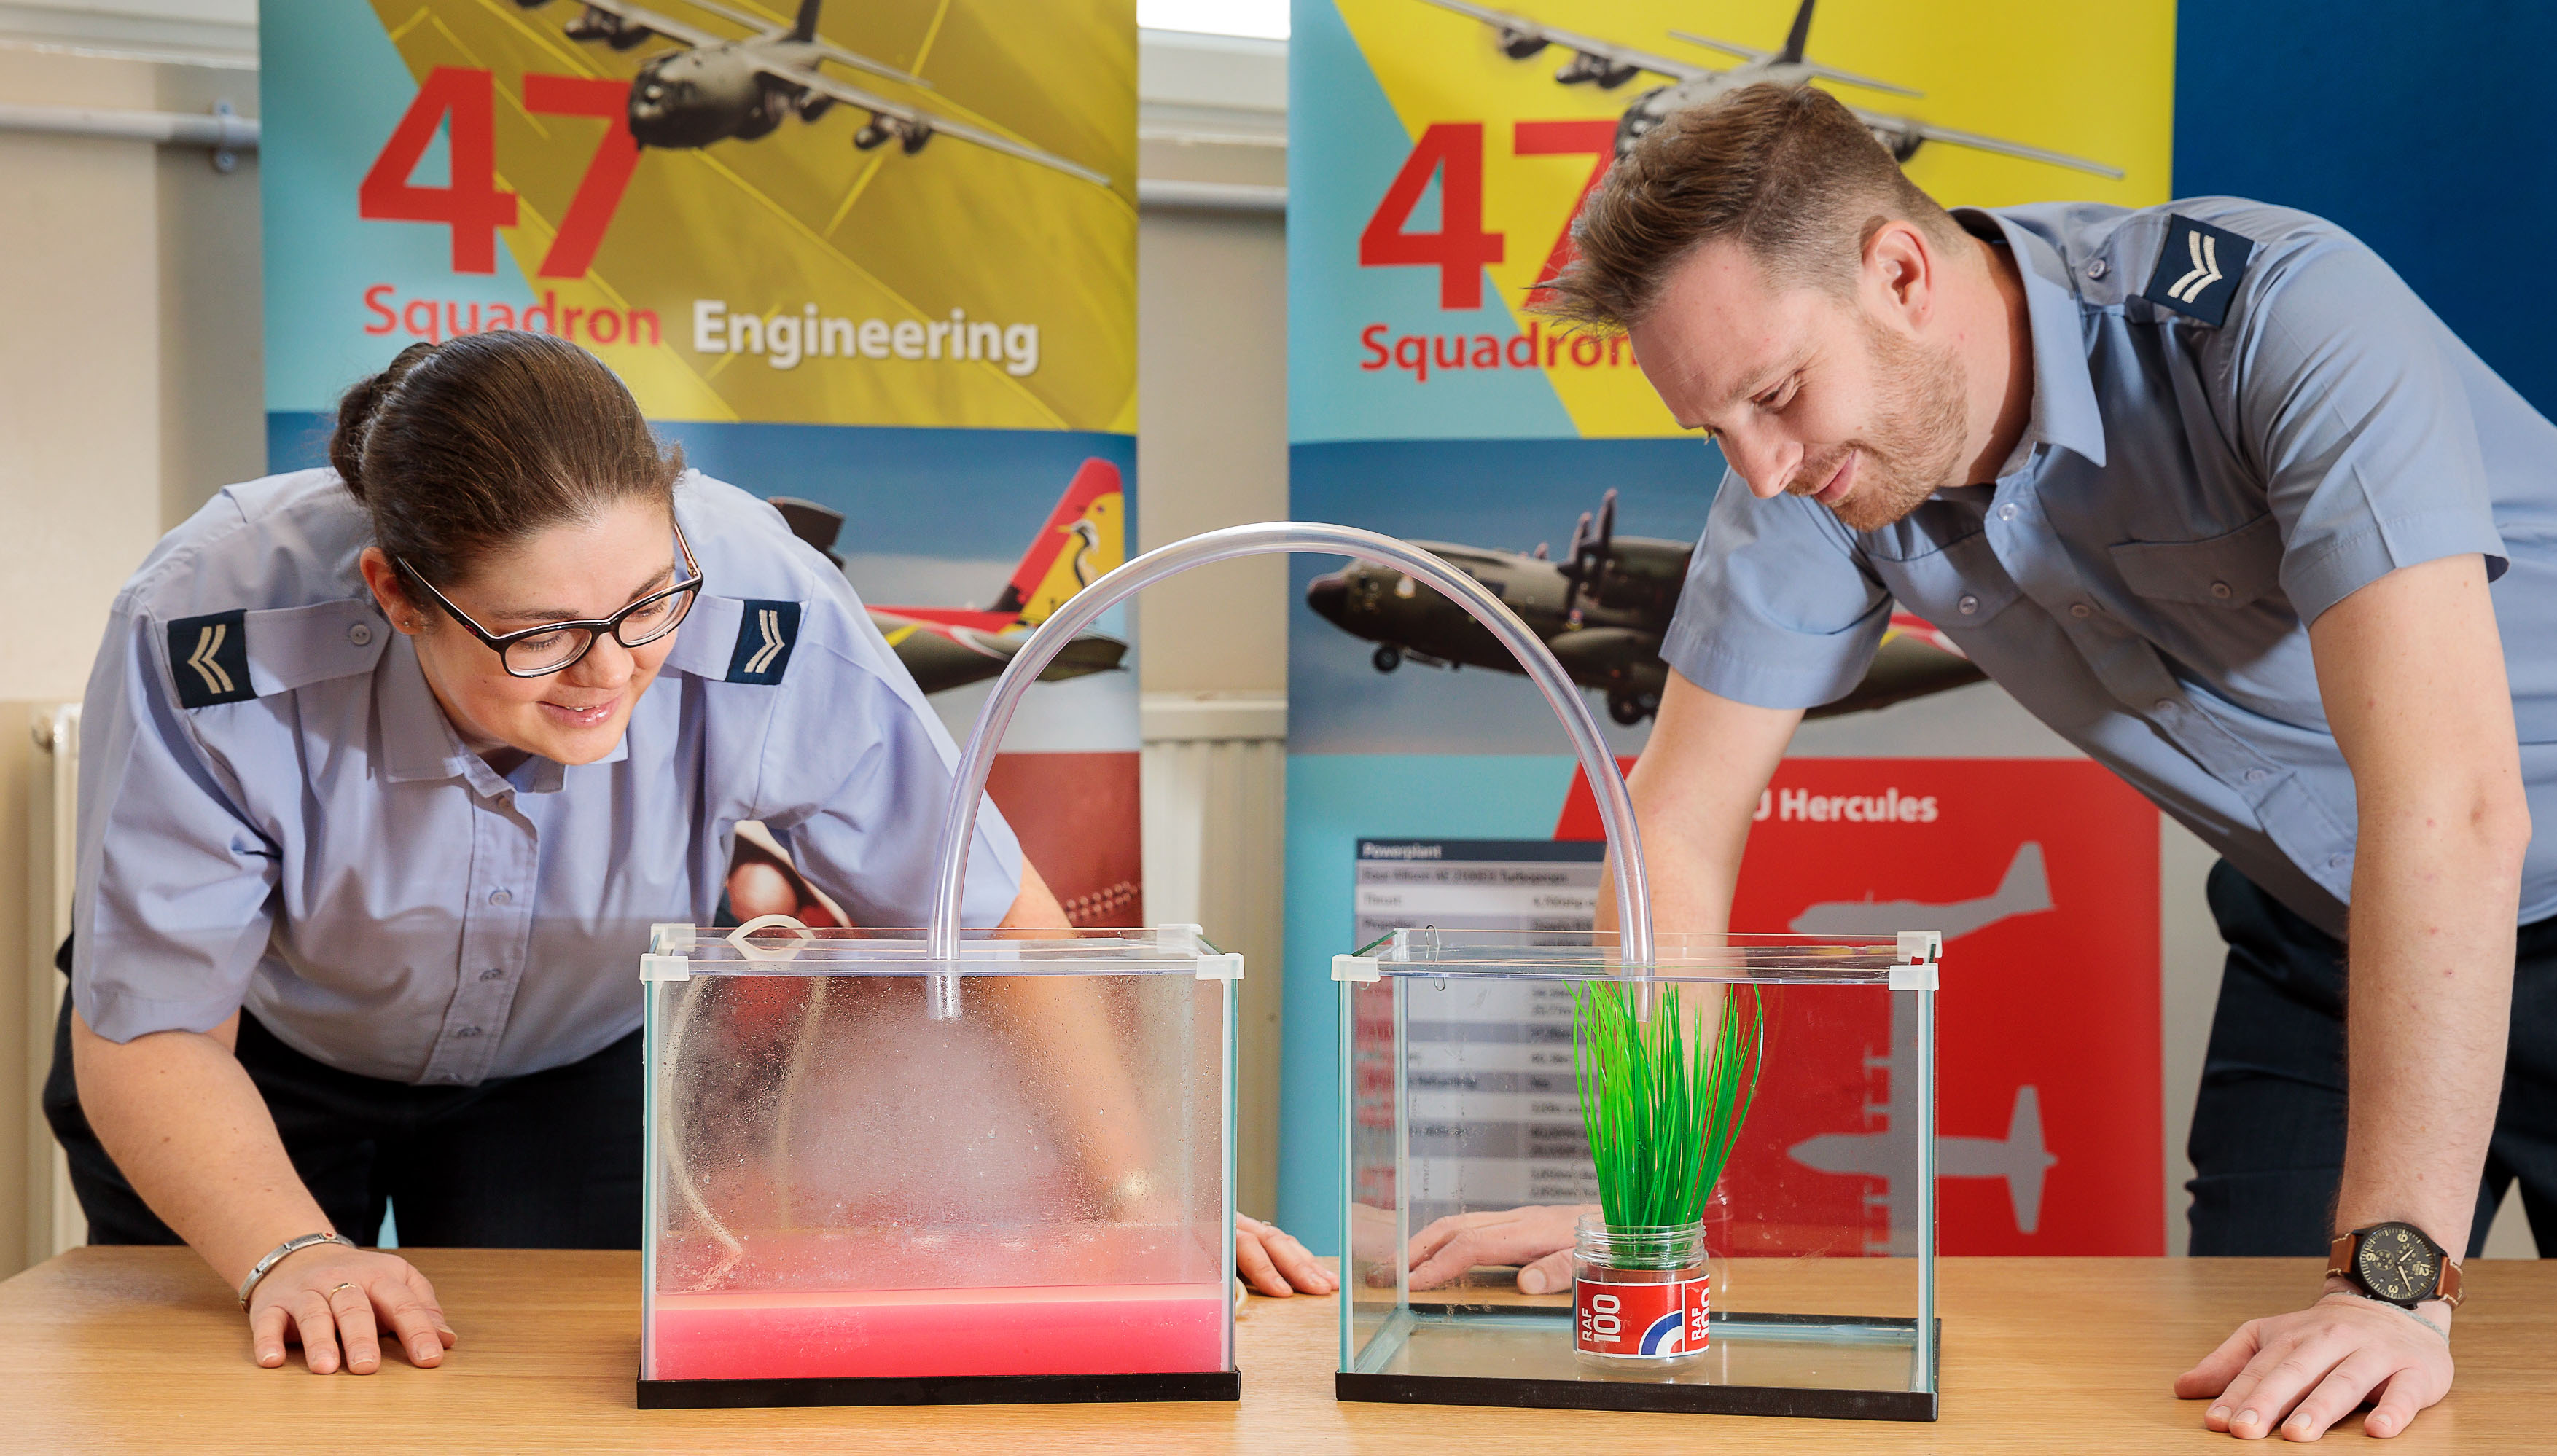 Image shows aviators performing experiment with two glass boxes and plant.